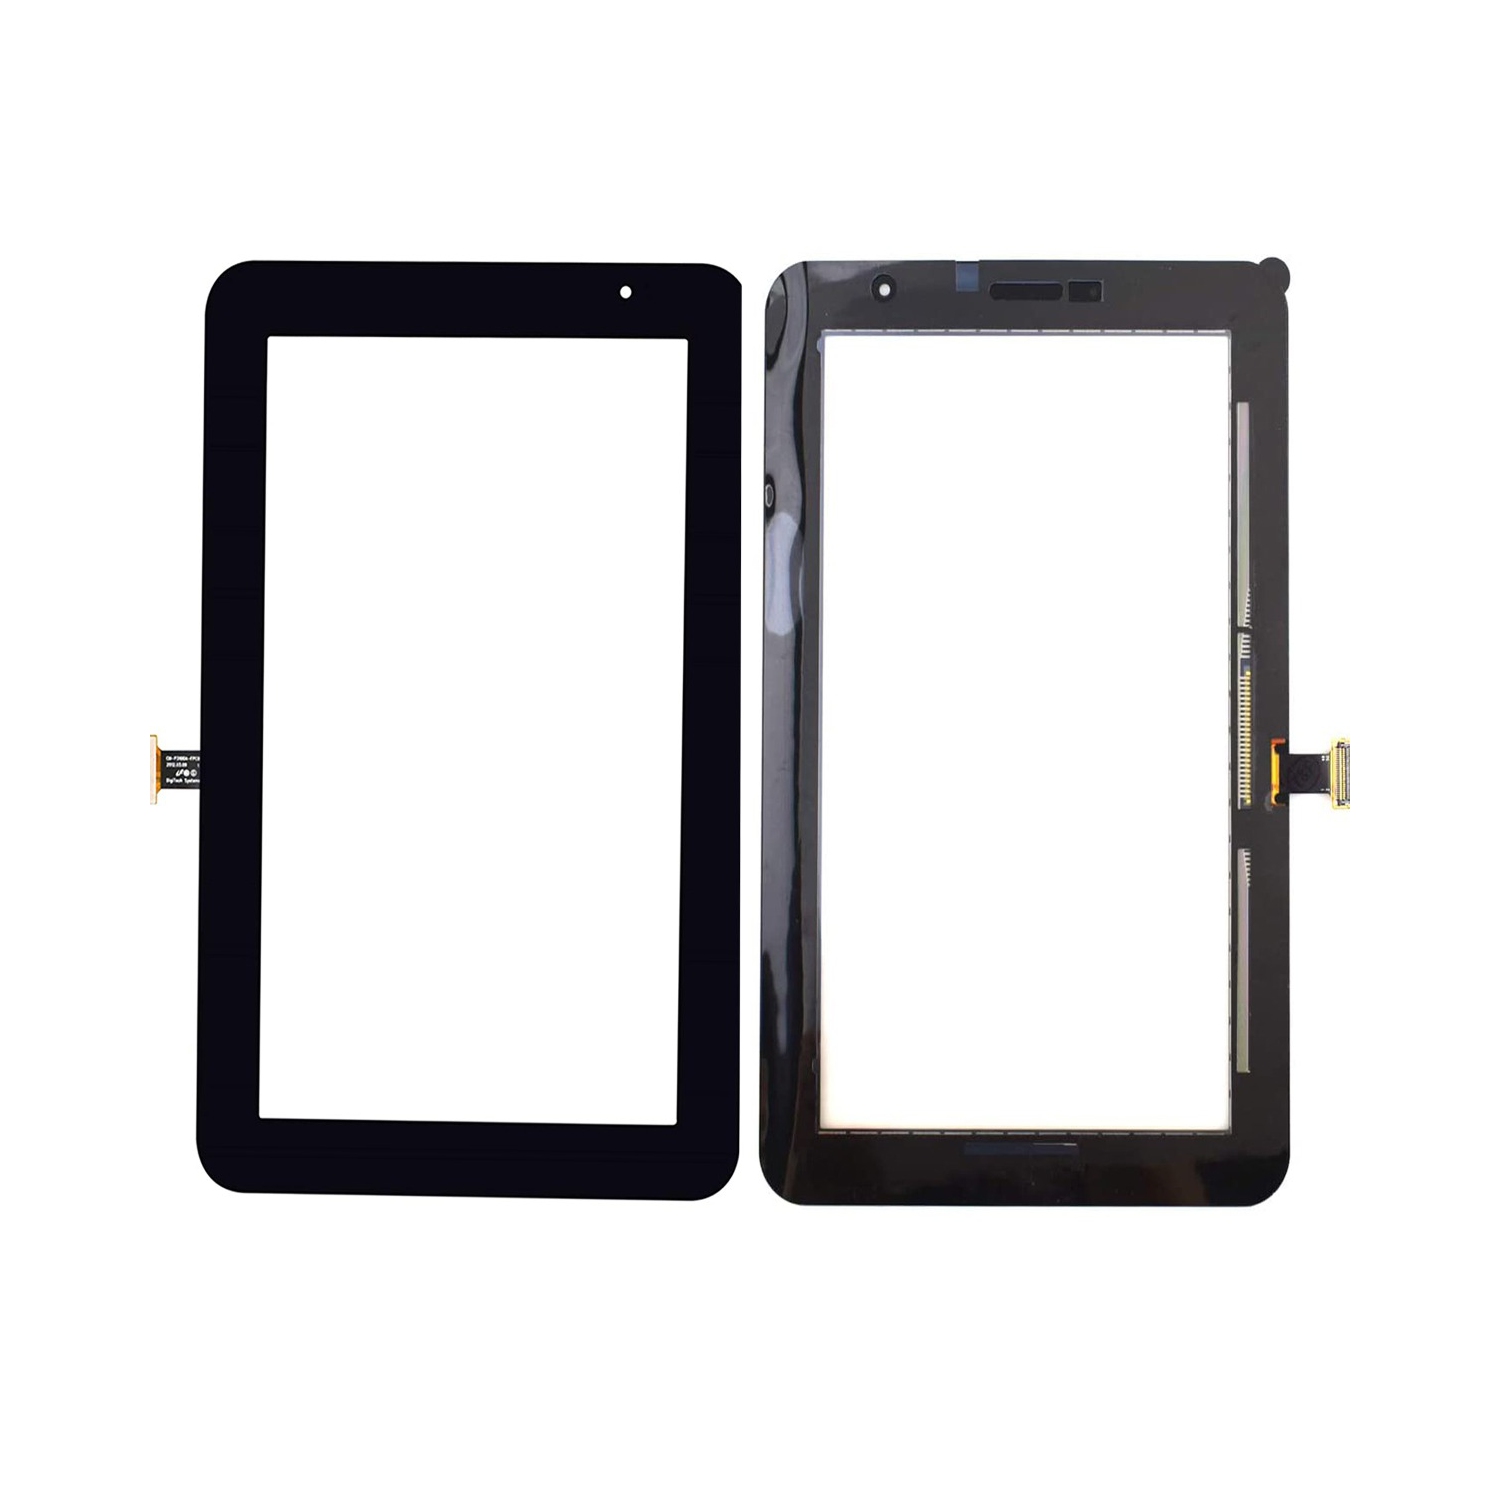 Touch Screen Digitizer Replacement For Samsung Galaxy Tab 2 7.0 (P3100) - Black